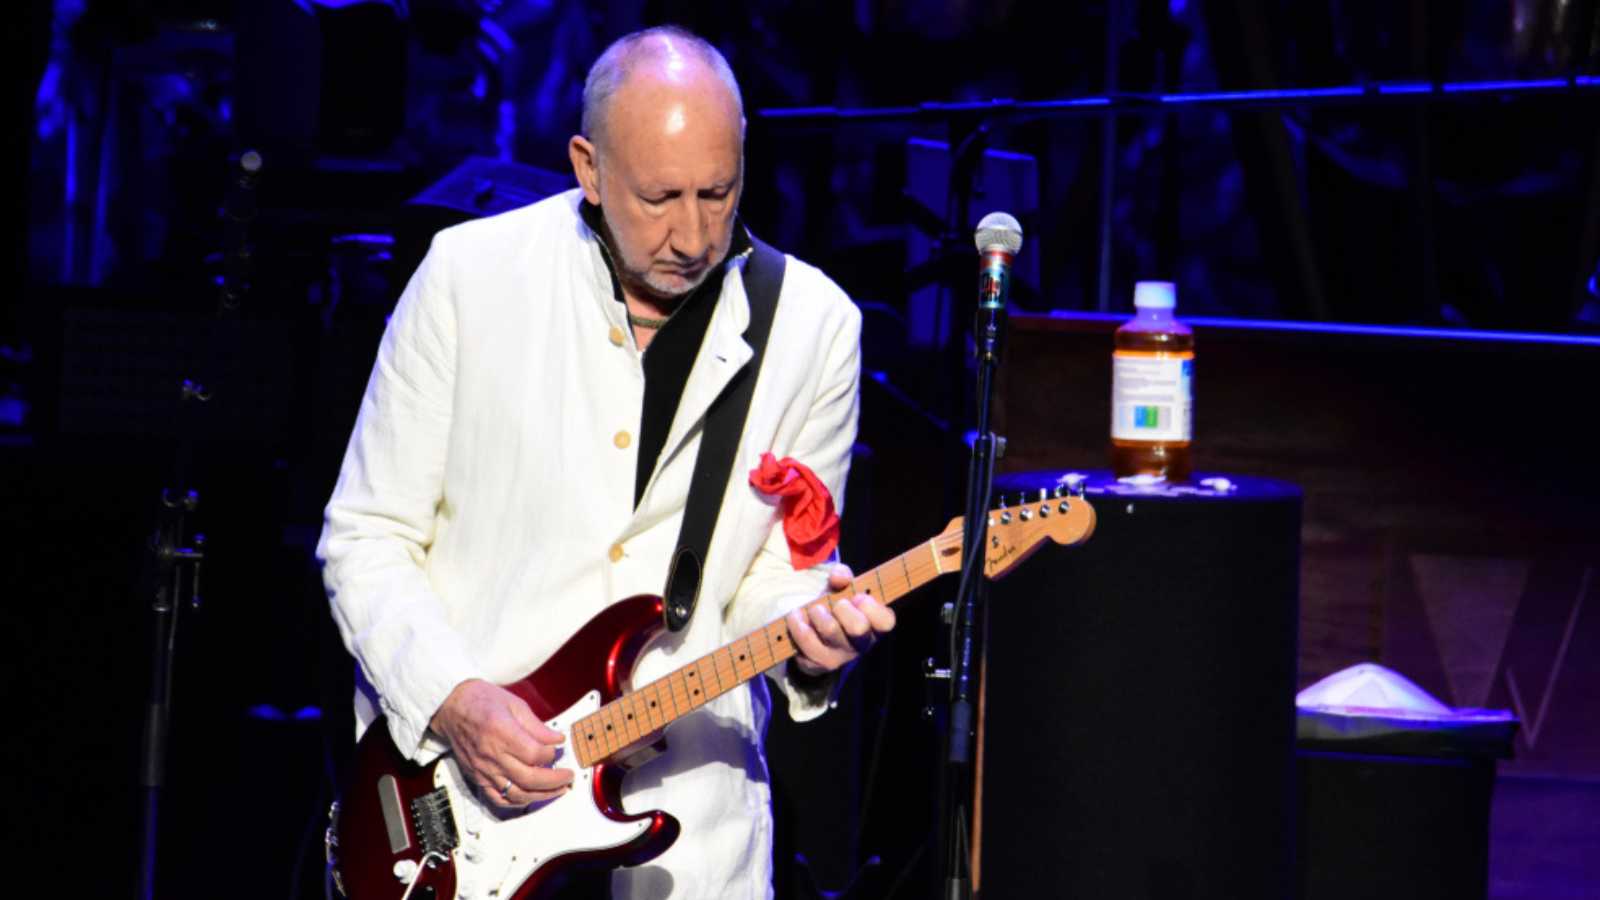 Tinley Park, IL / USA - May 21, 2019: Roger Daltrey and Pete Townshend of The Who 